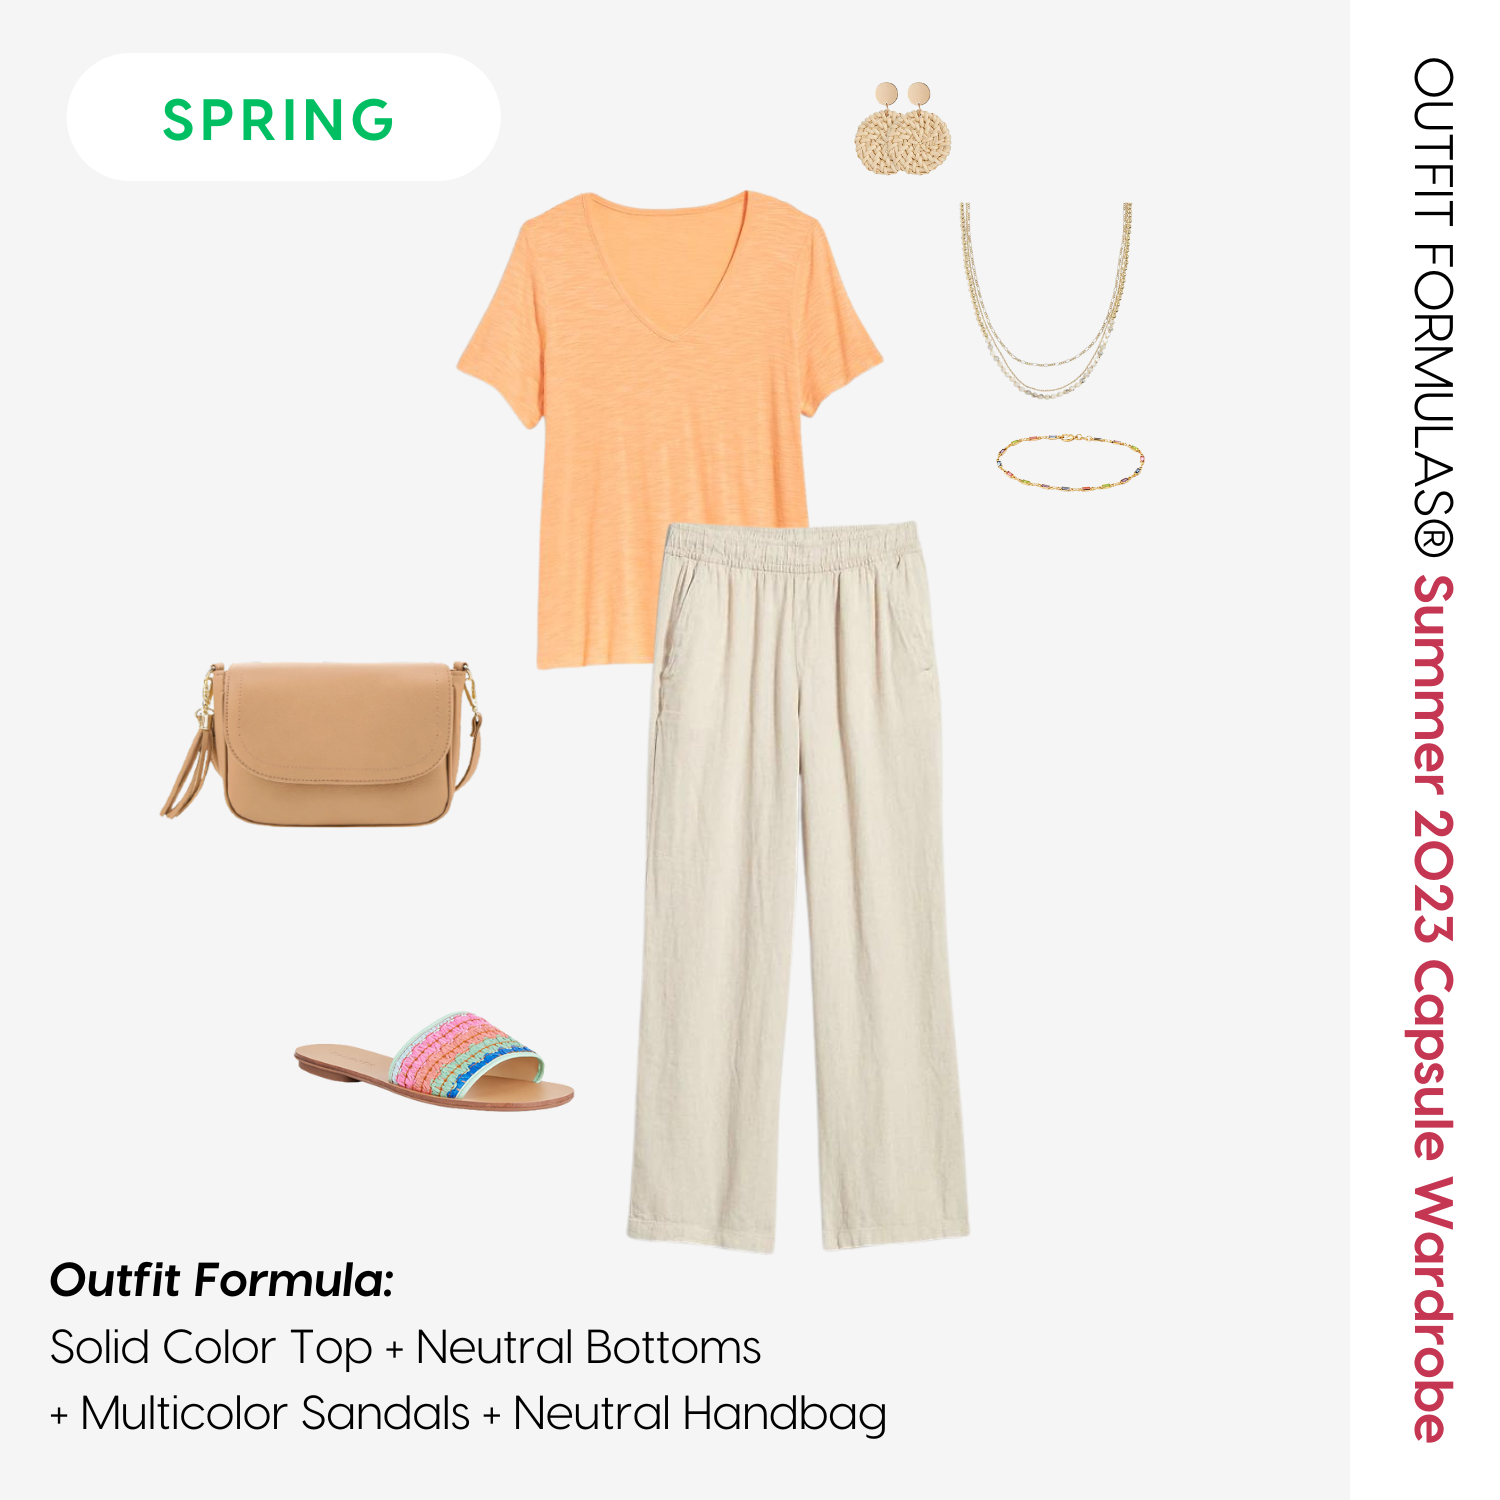 How to dress to color seasons - Spring color season